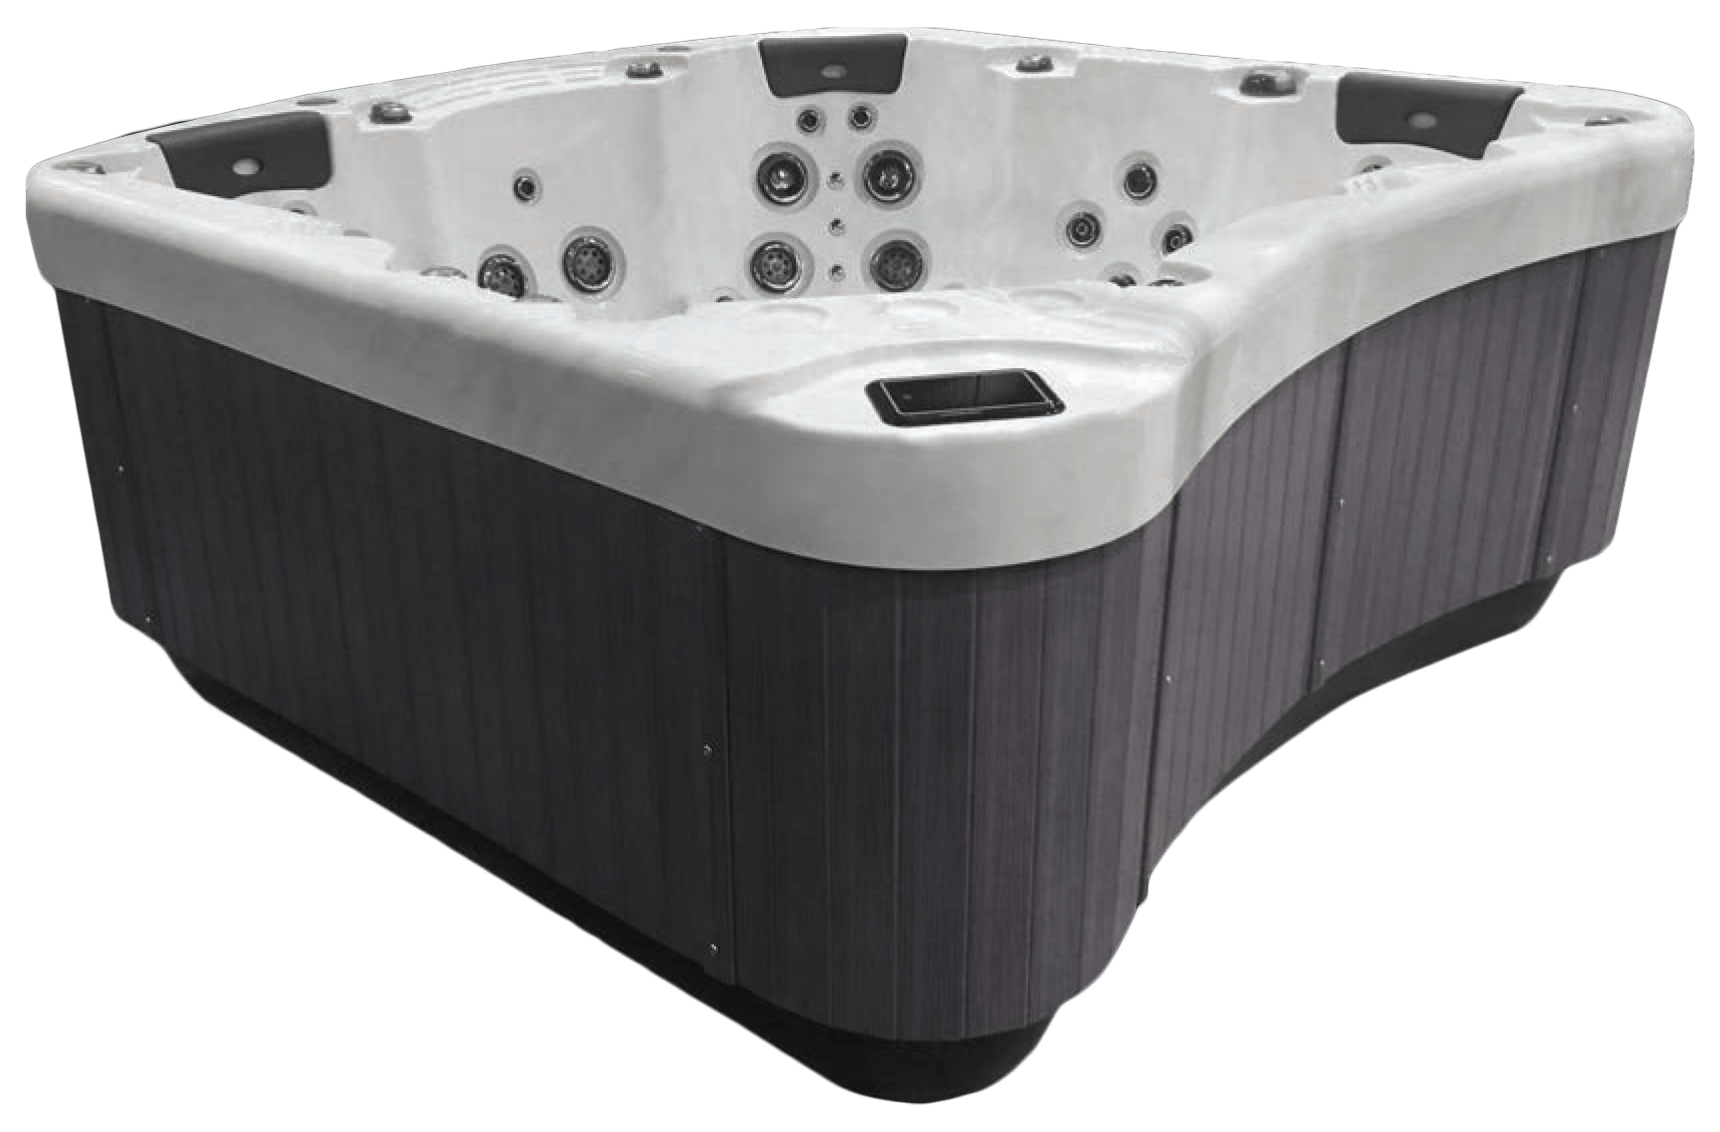 Be Well E770 Hot Tub Grey side panels in White